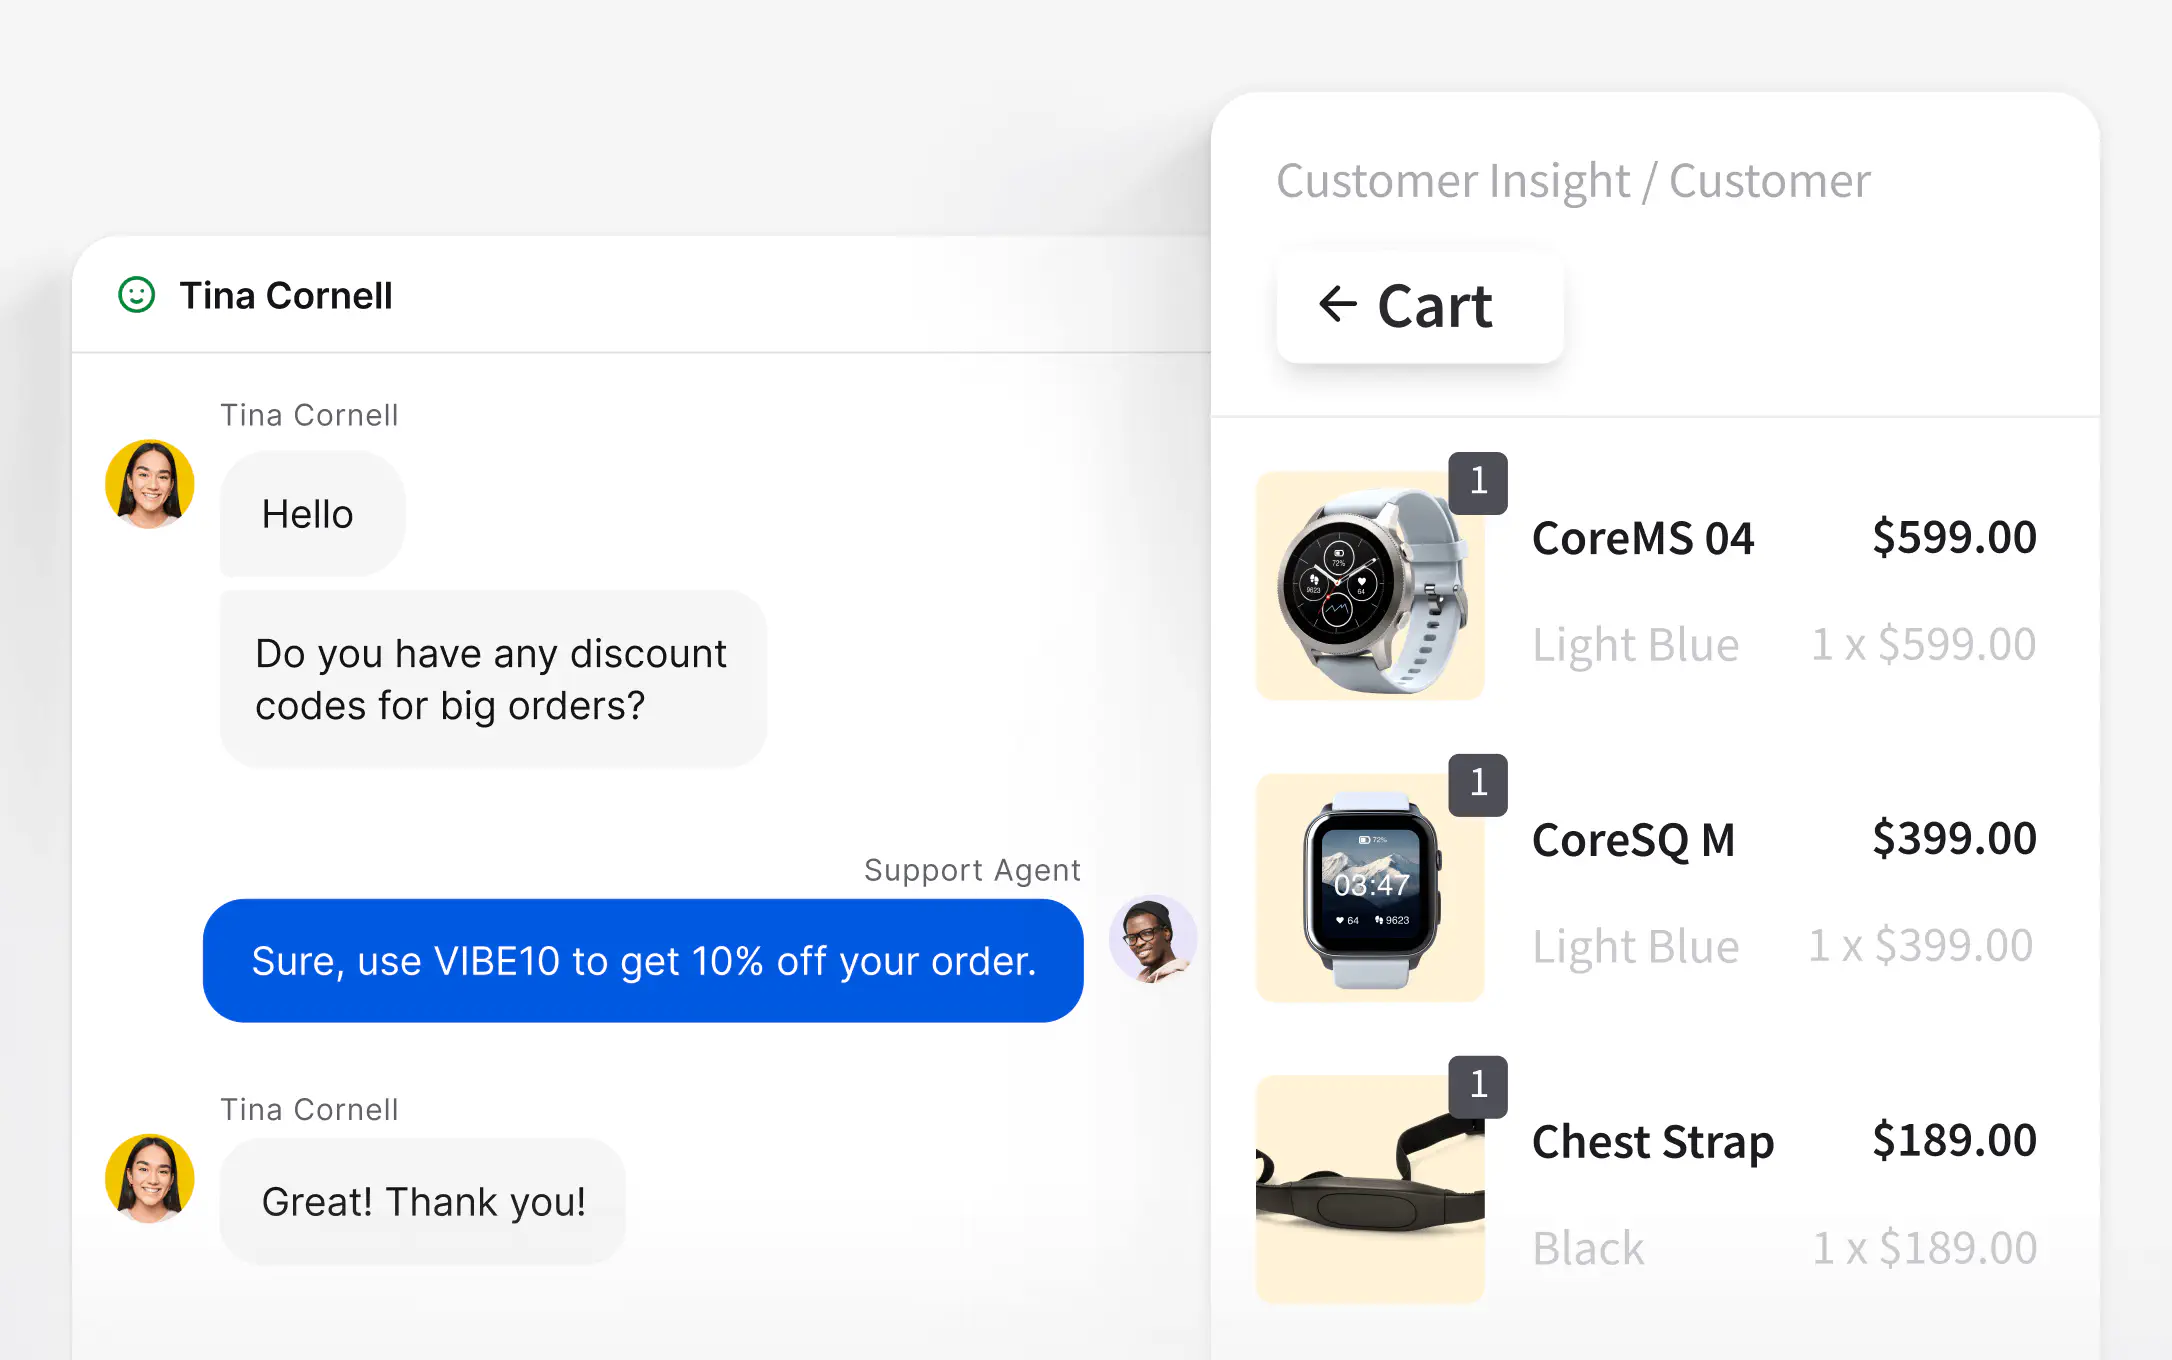 Customer details and cart preview in live chat